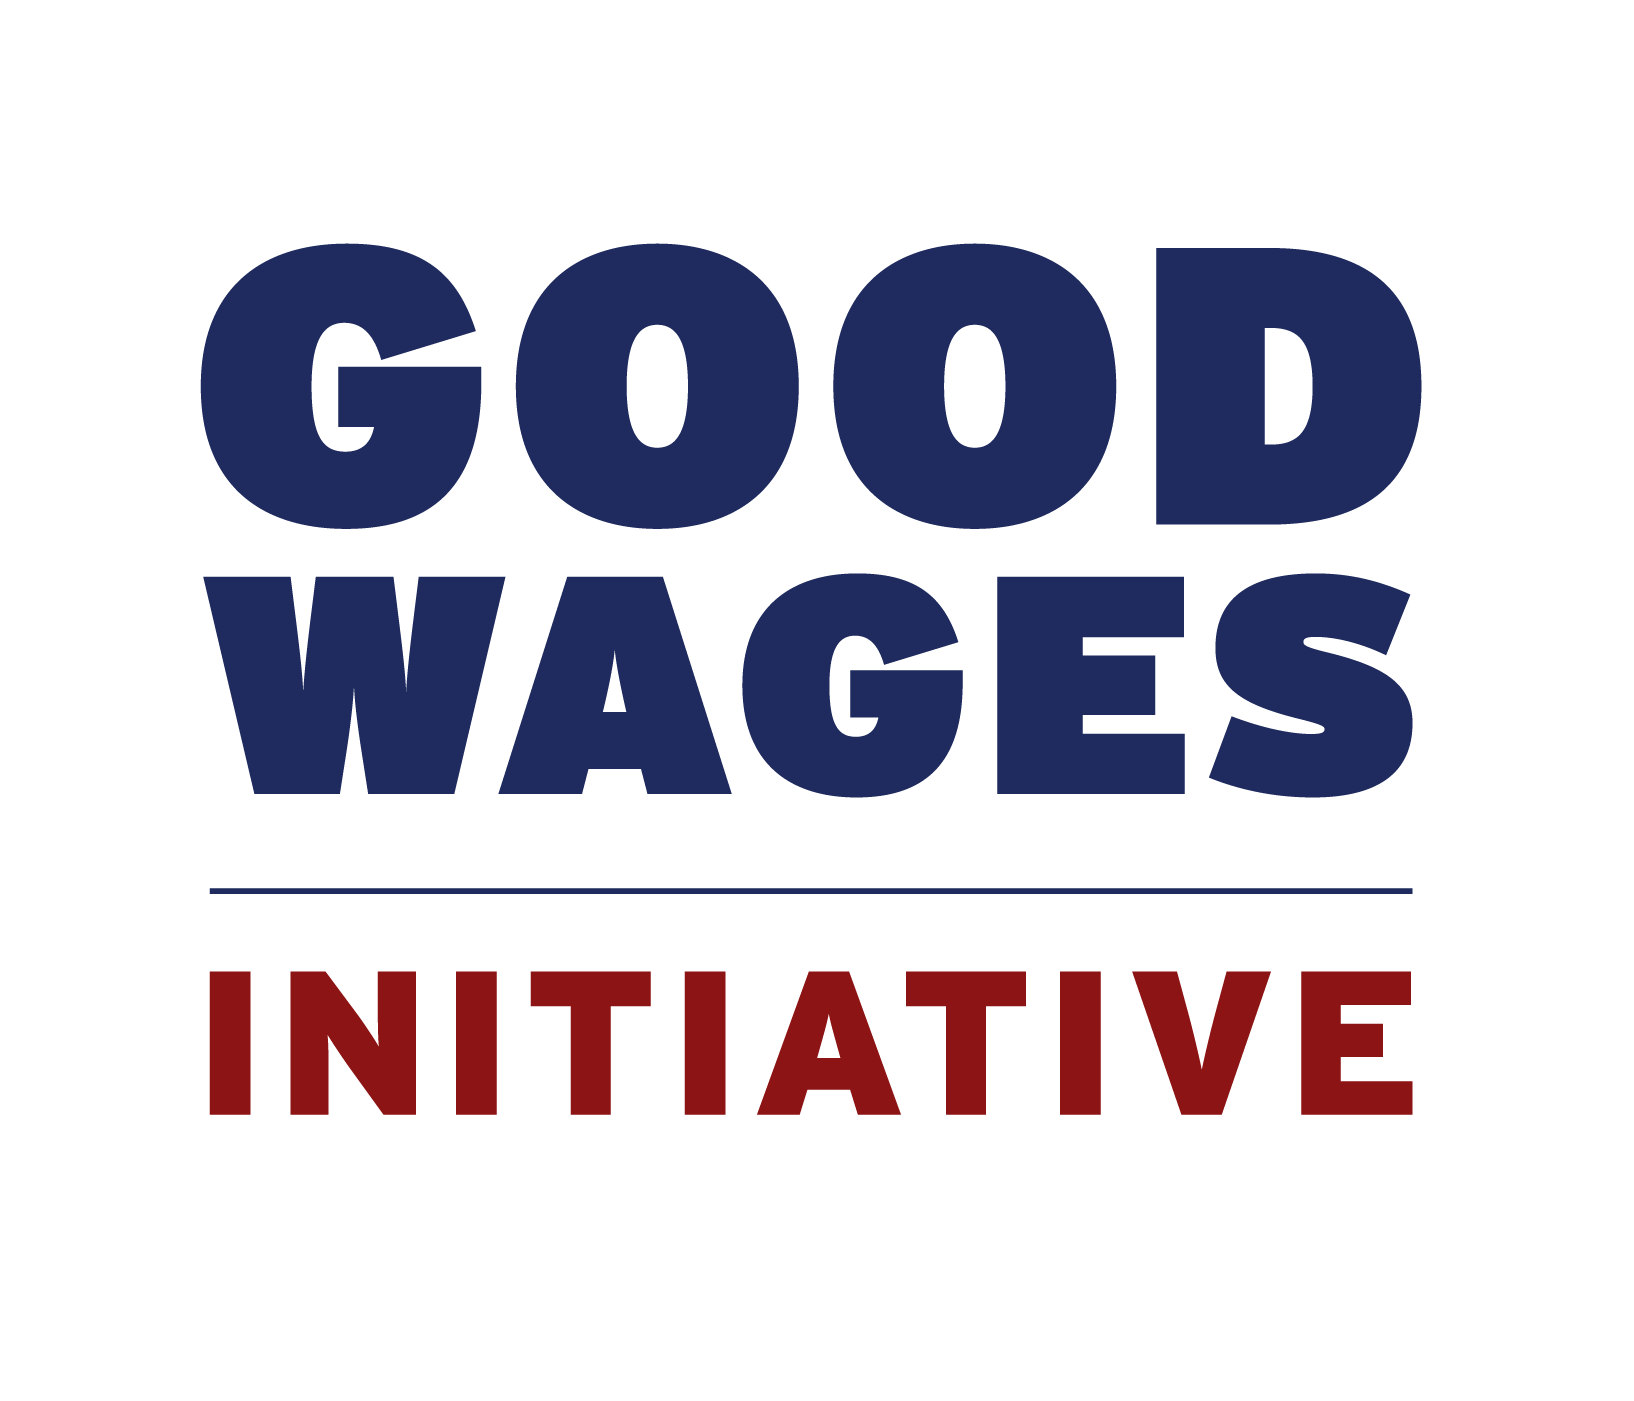 Feeding Indiana’s Hungry is a Certified Good Wages Initiative Employer of Choice